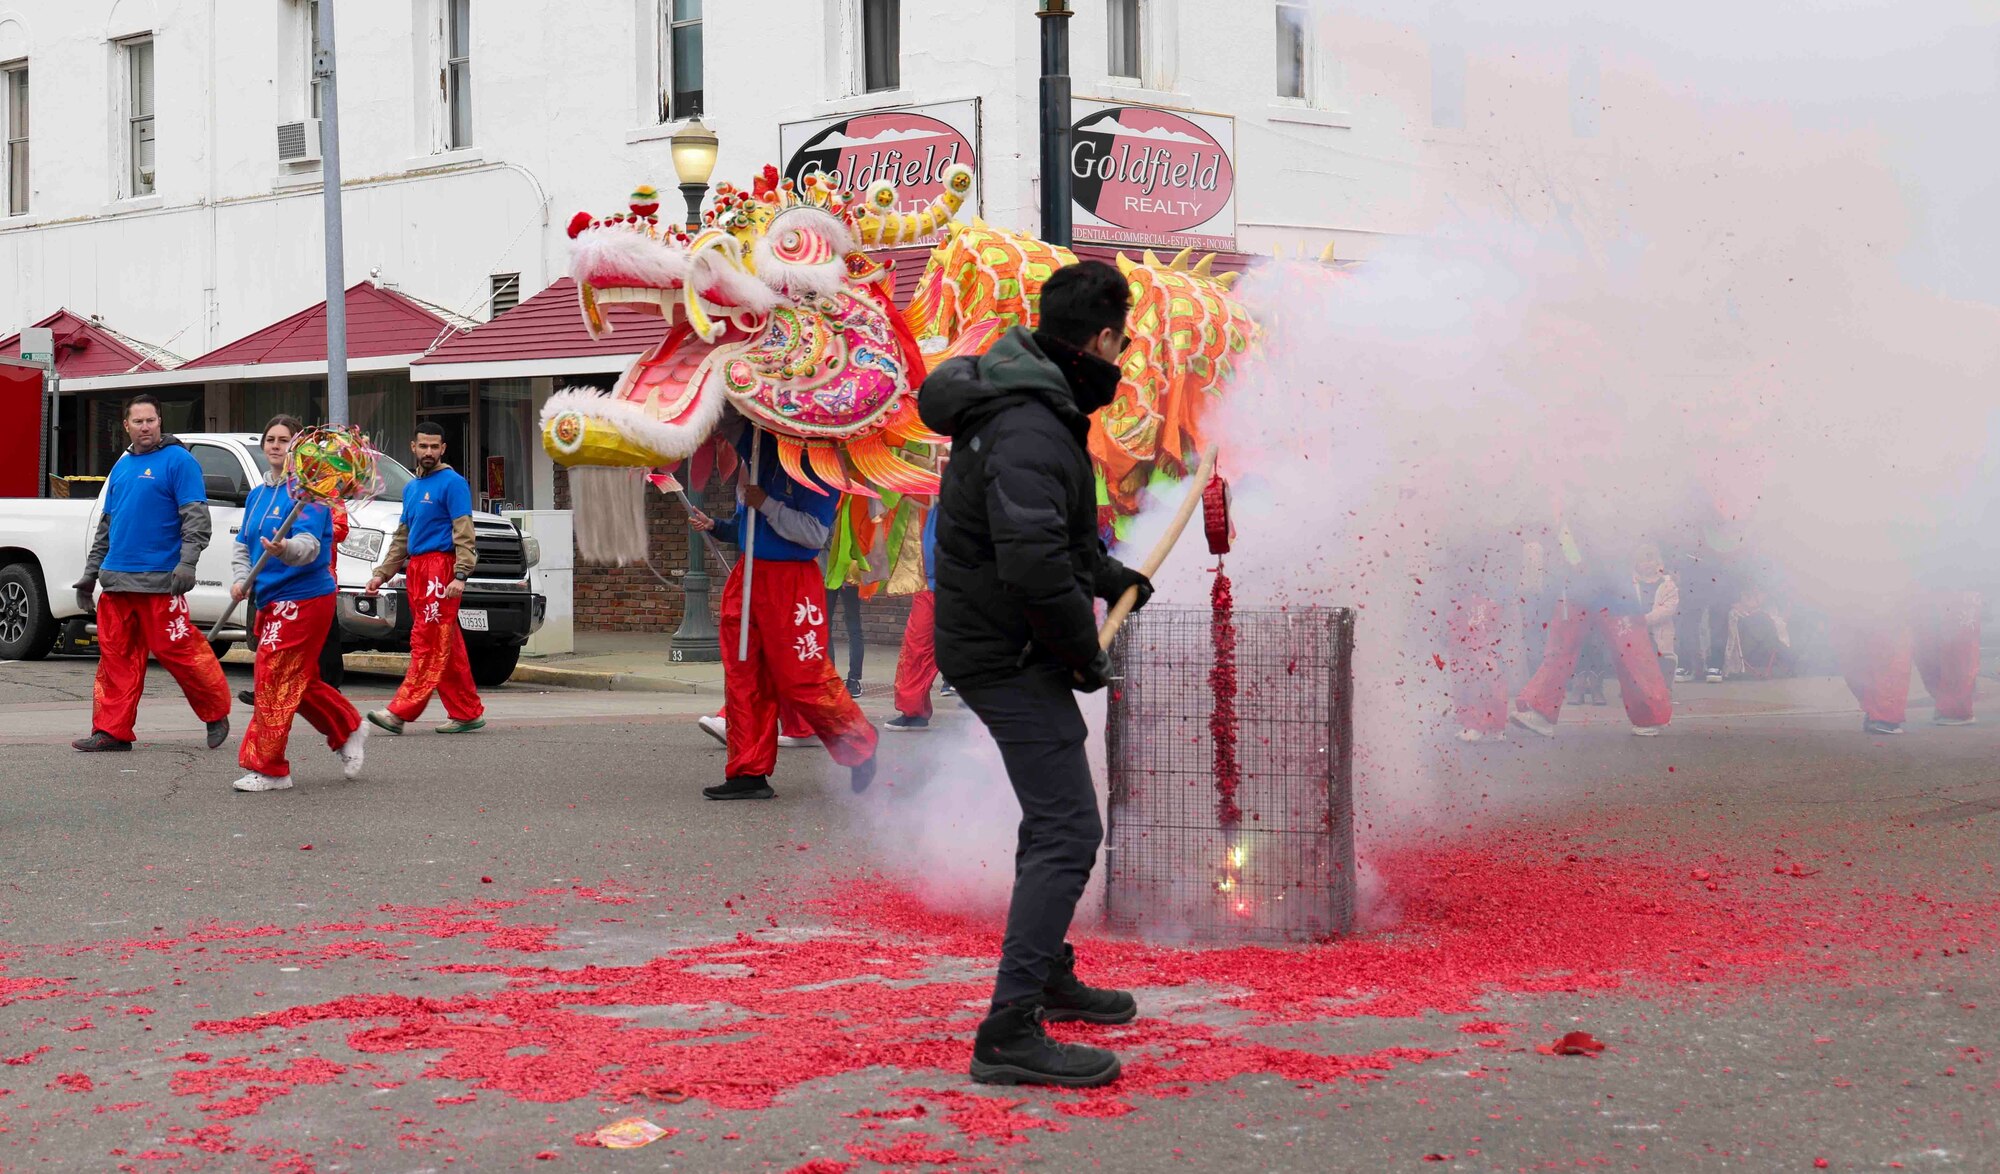 A member of the Marysville Chinese community lights fireworks for the dragon “Hong Wan Lung”, held by Airmen from Beale Air Force Base, Calif., to dance around during the 143rd Bok Kai parade on Feb. 25, 2023 in Marysville, Calif.